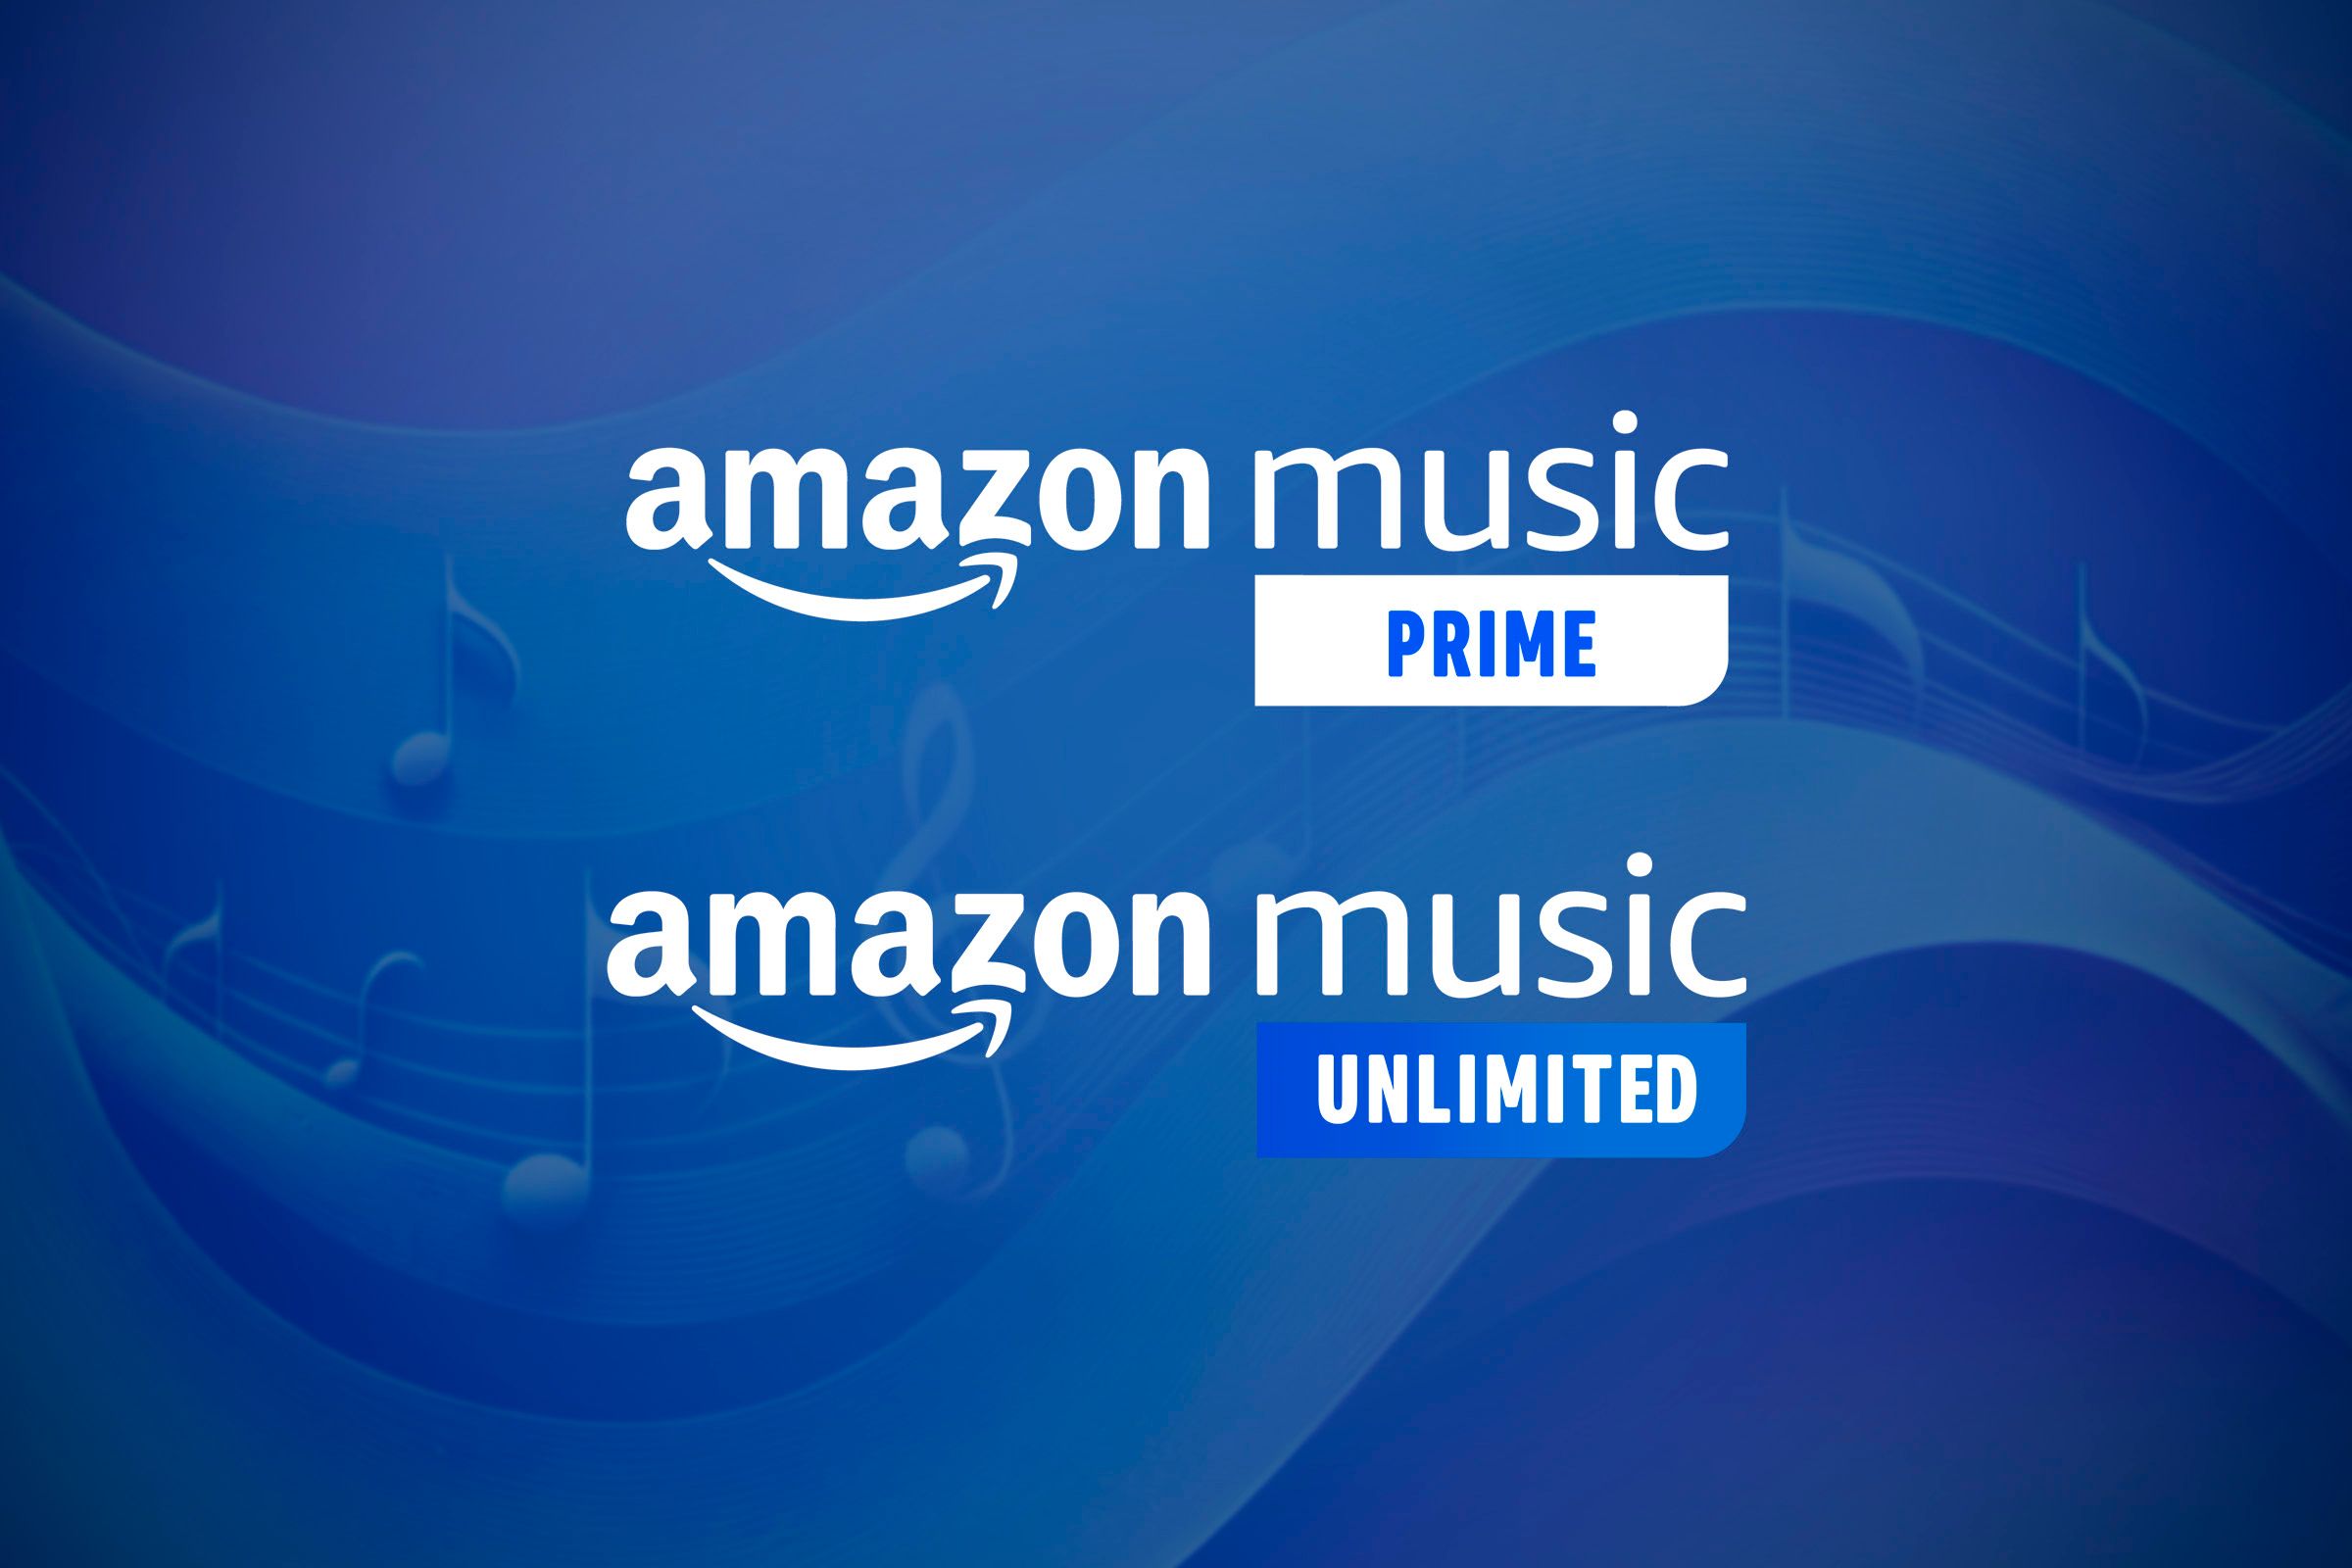 The amazon music prime logo on top and the amazon music unlimited on bottom with a musical wave background